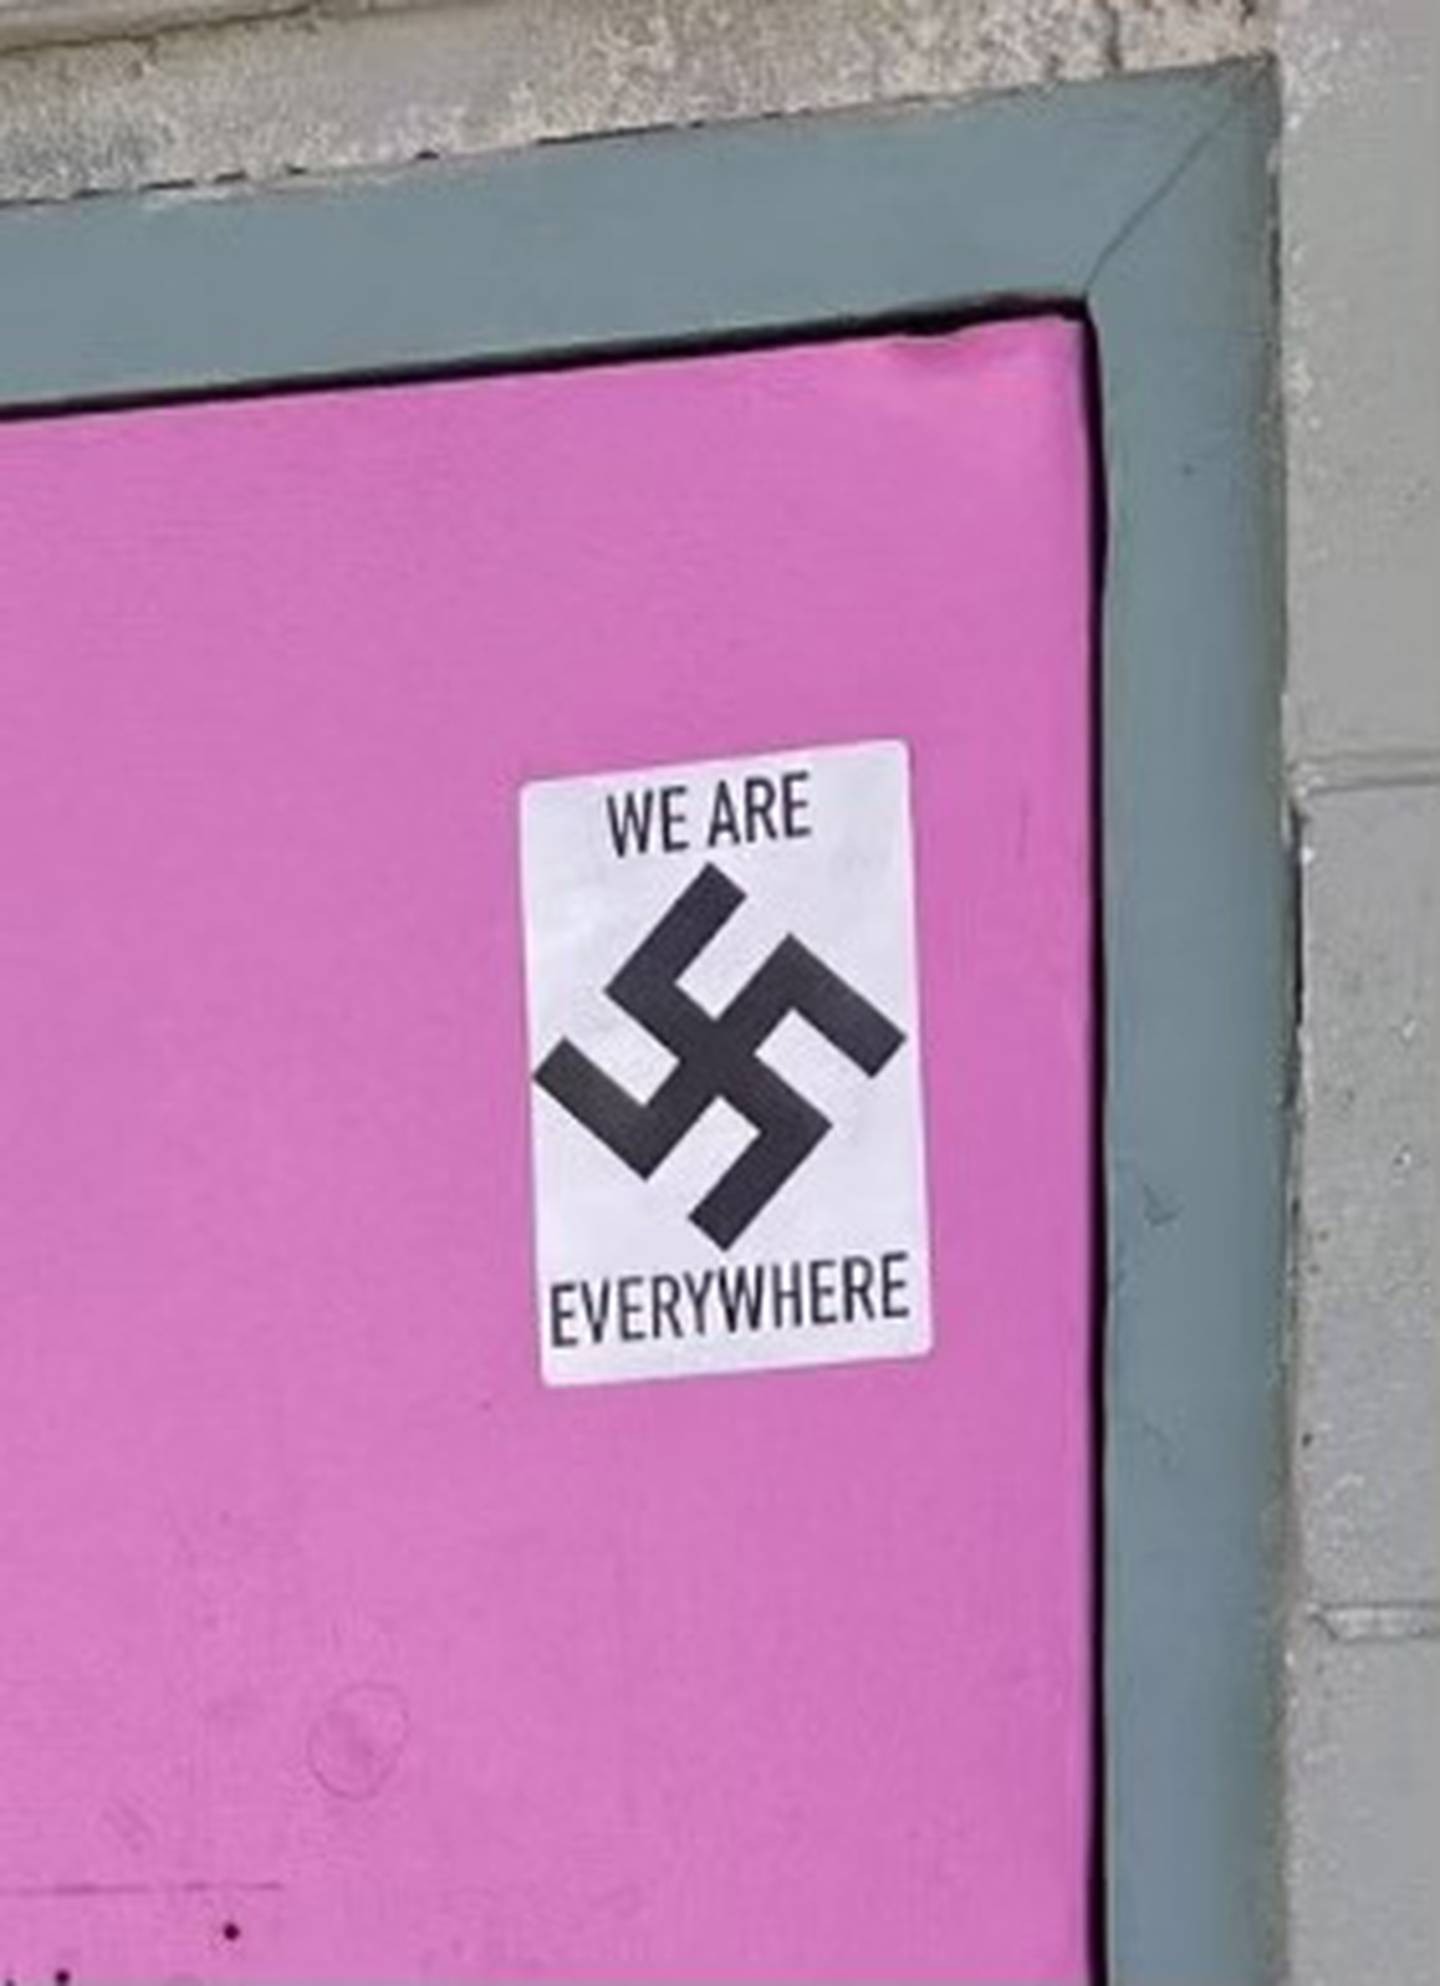 Swastika stickers we are everywhere Anchorage Police Department investigation